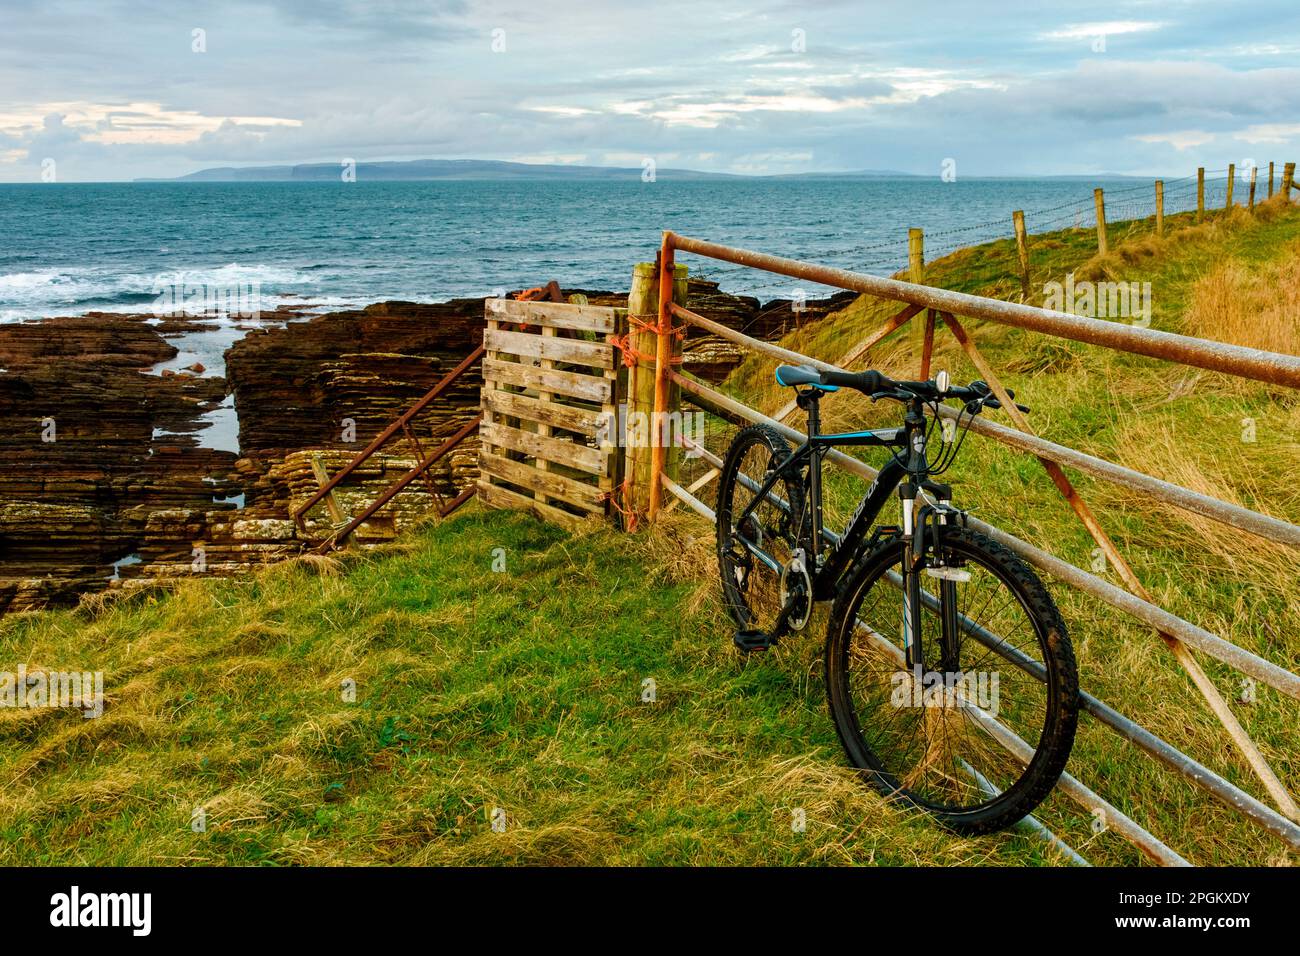 Island of Hoy, Orkney, over the Pentland Firth, from a field gate near the village of Mey, Caithness, Scotland, UK.  A mountain bike in the foreground Stock Photo